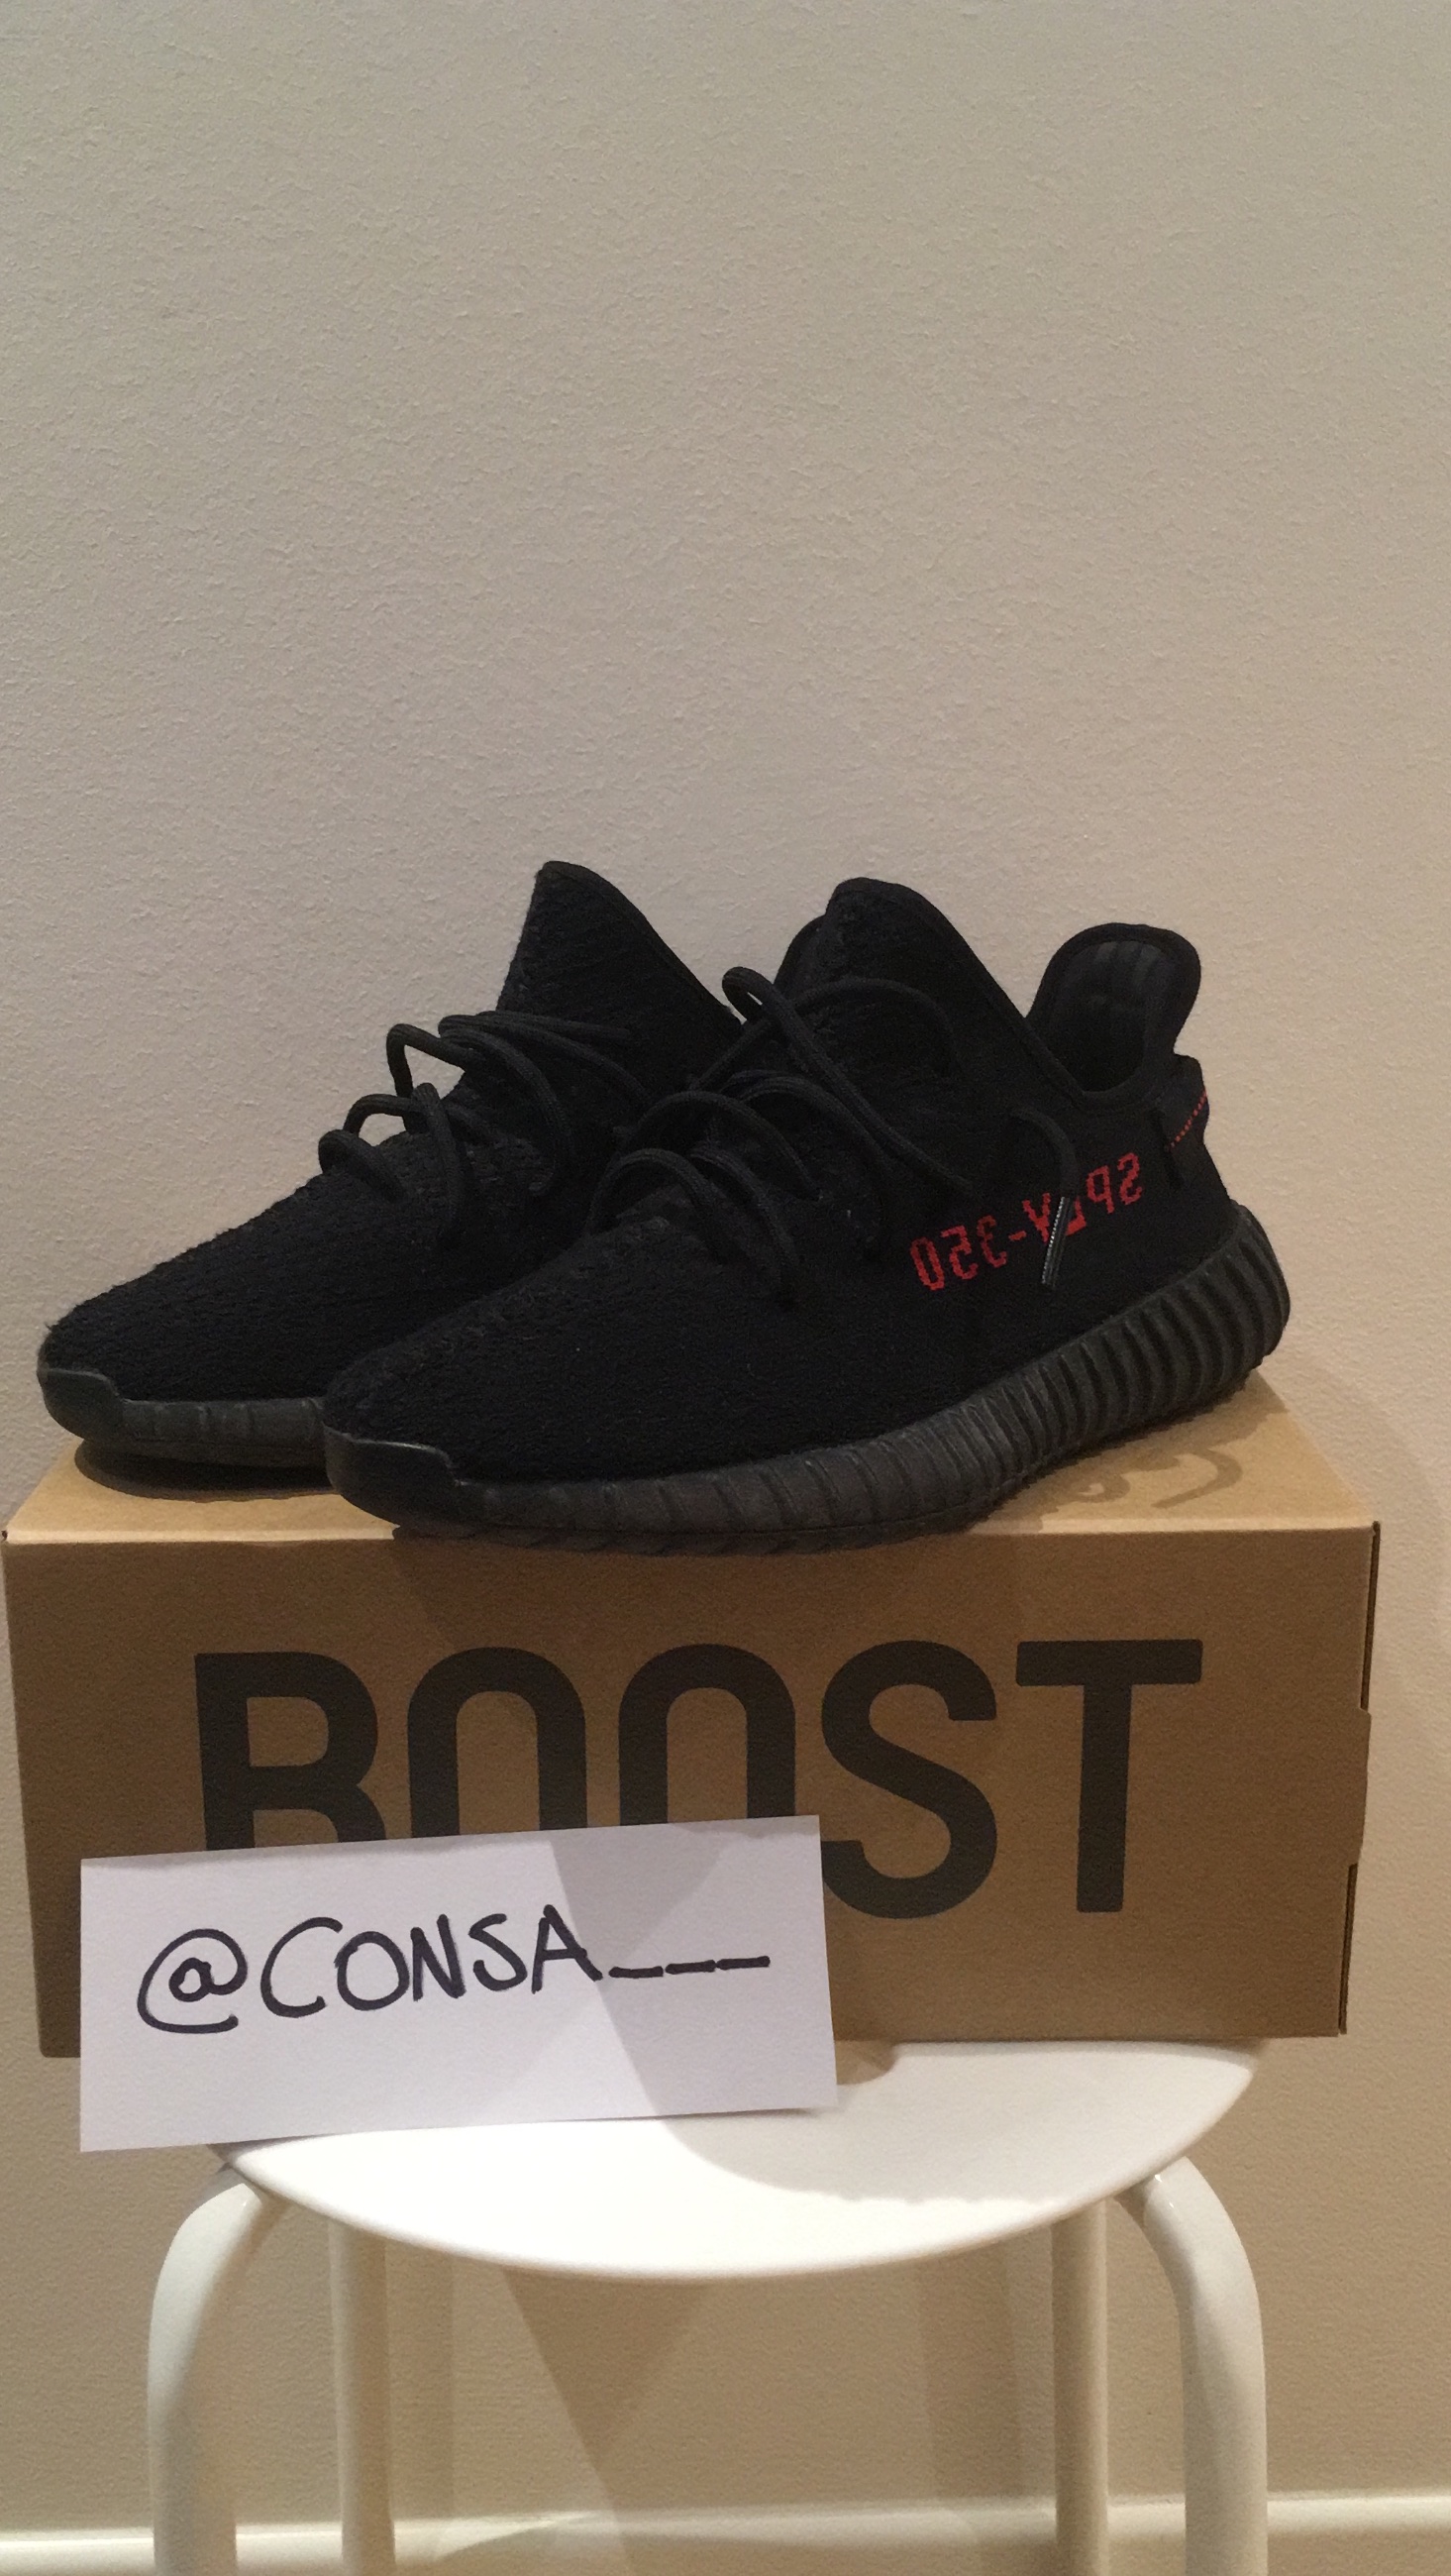 Cheap Size 8 Adidas Yeezy Boost 350 V2 Black Reflective Replacement Box